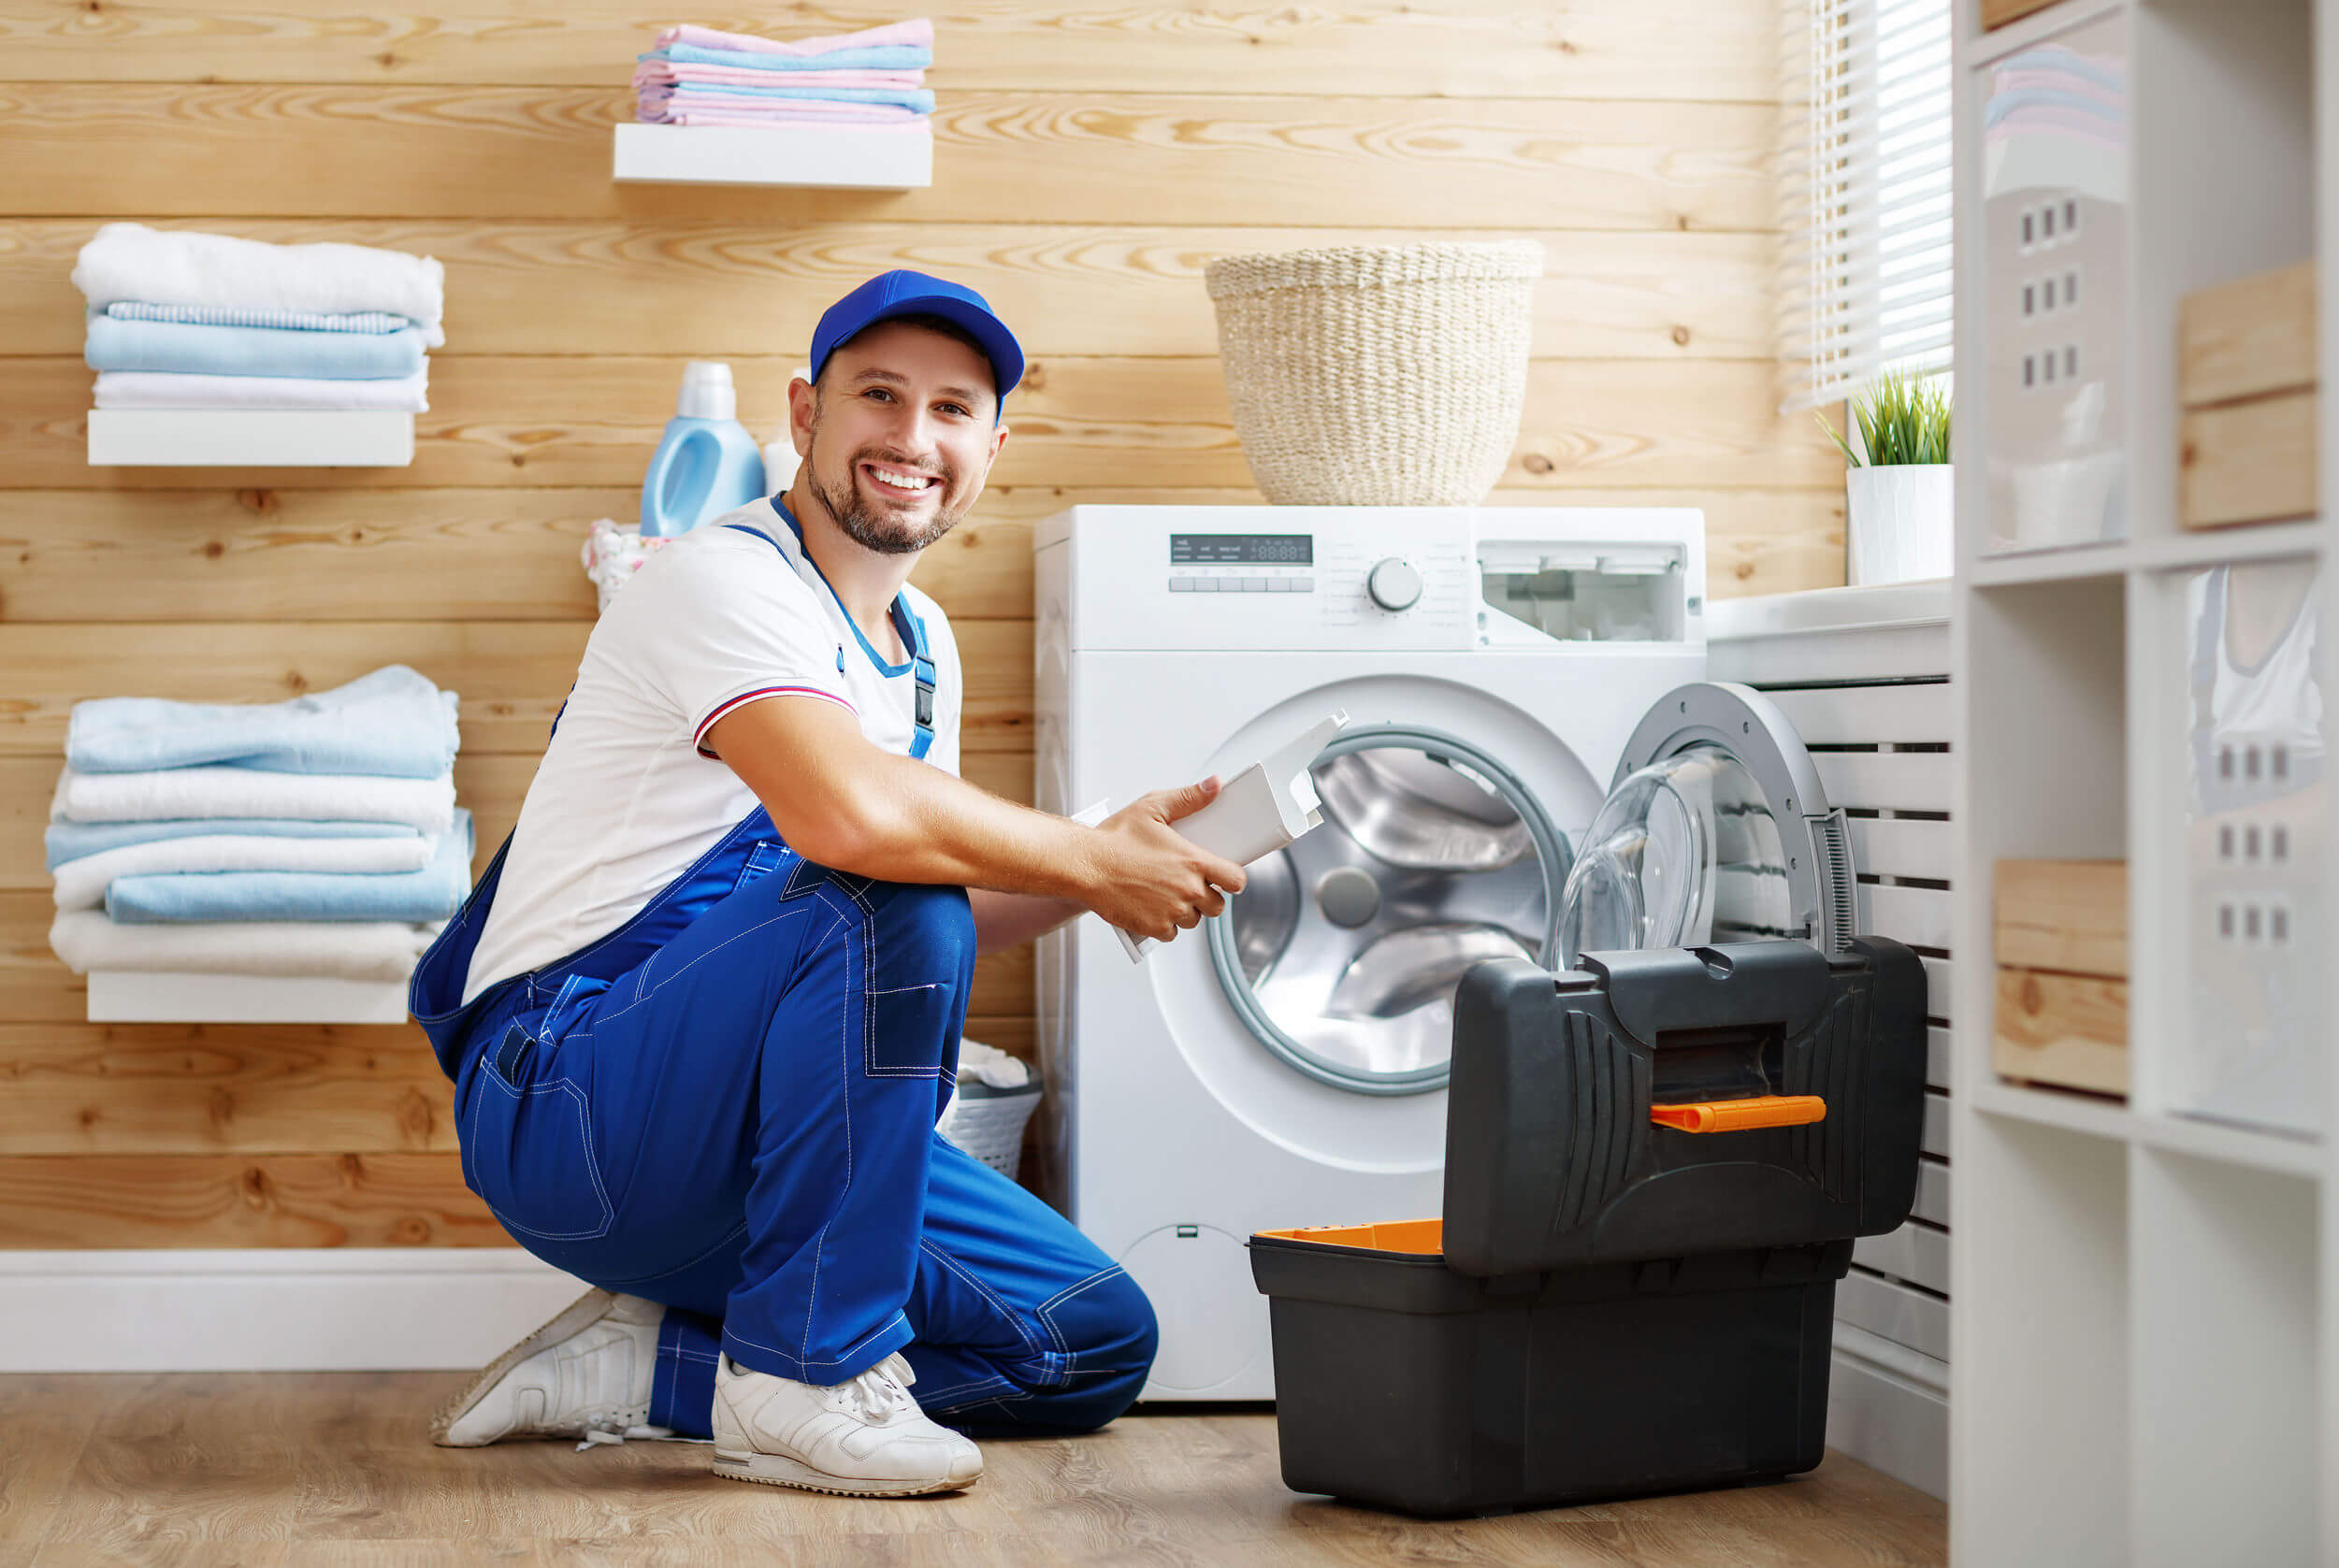 You are currently viewing Dryer Repair in Dubai